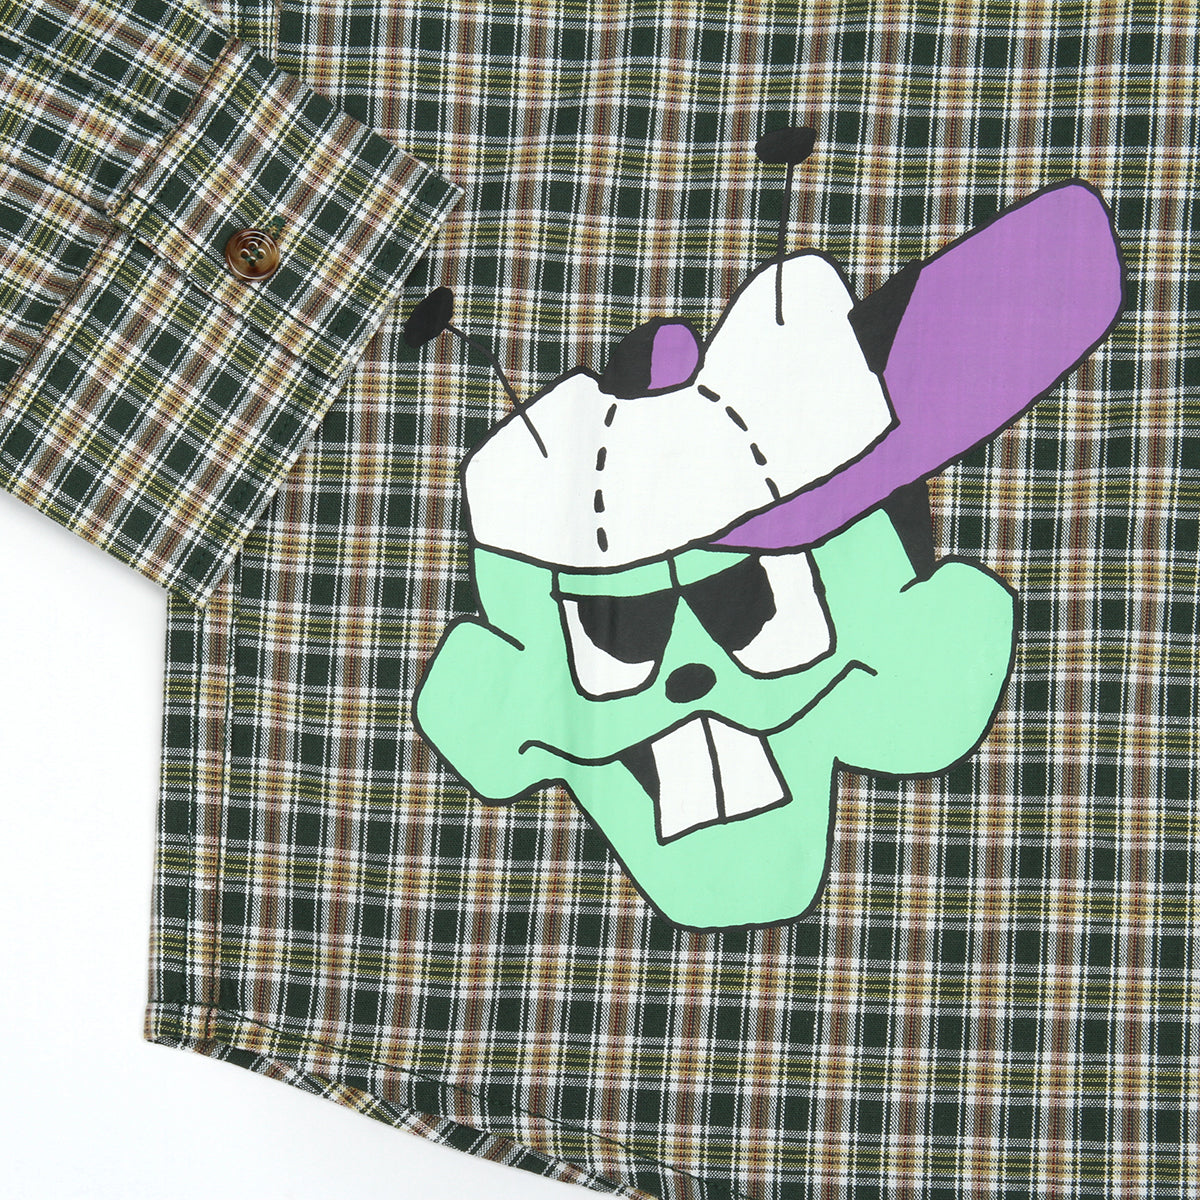 Butter Goods Bug Out L/S Shirt Forest